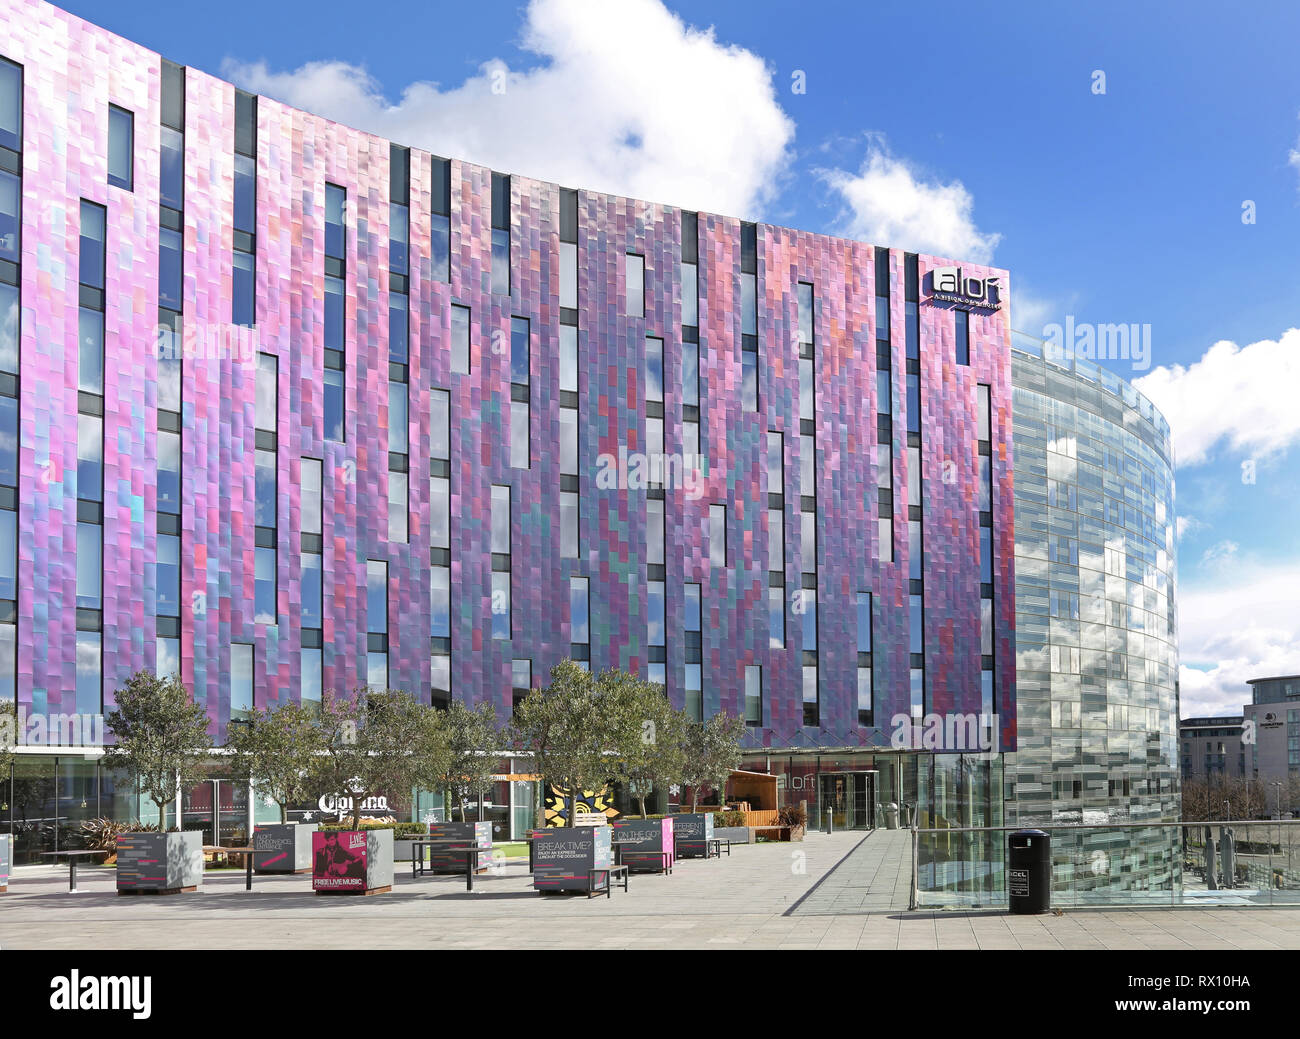 The new 'W' Aloft hotel next to the Excel Exhibition Centre in London's docklands district, east of the City. Shows multi-coloured metallic cladding. Stock Photo